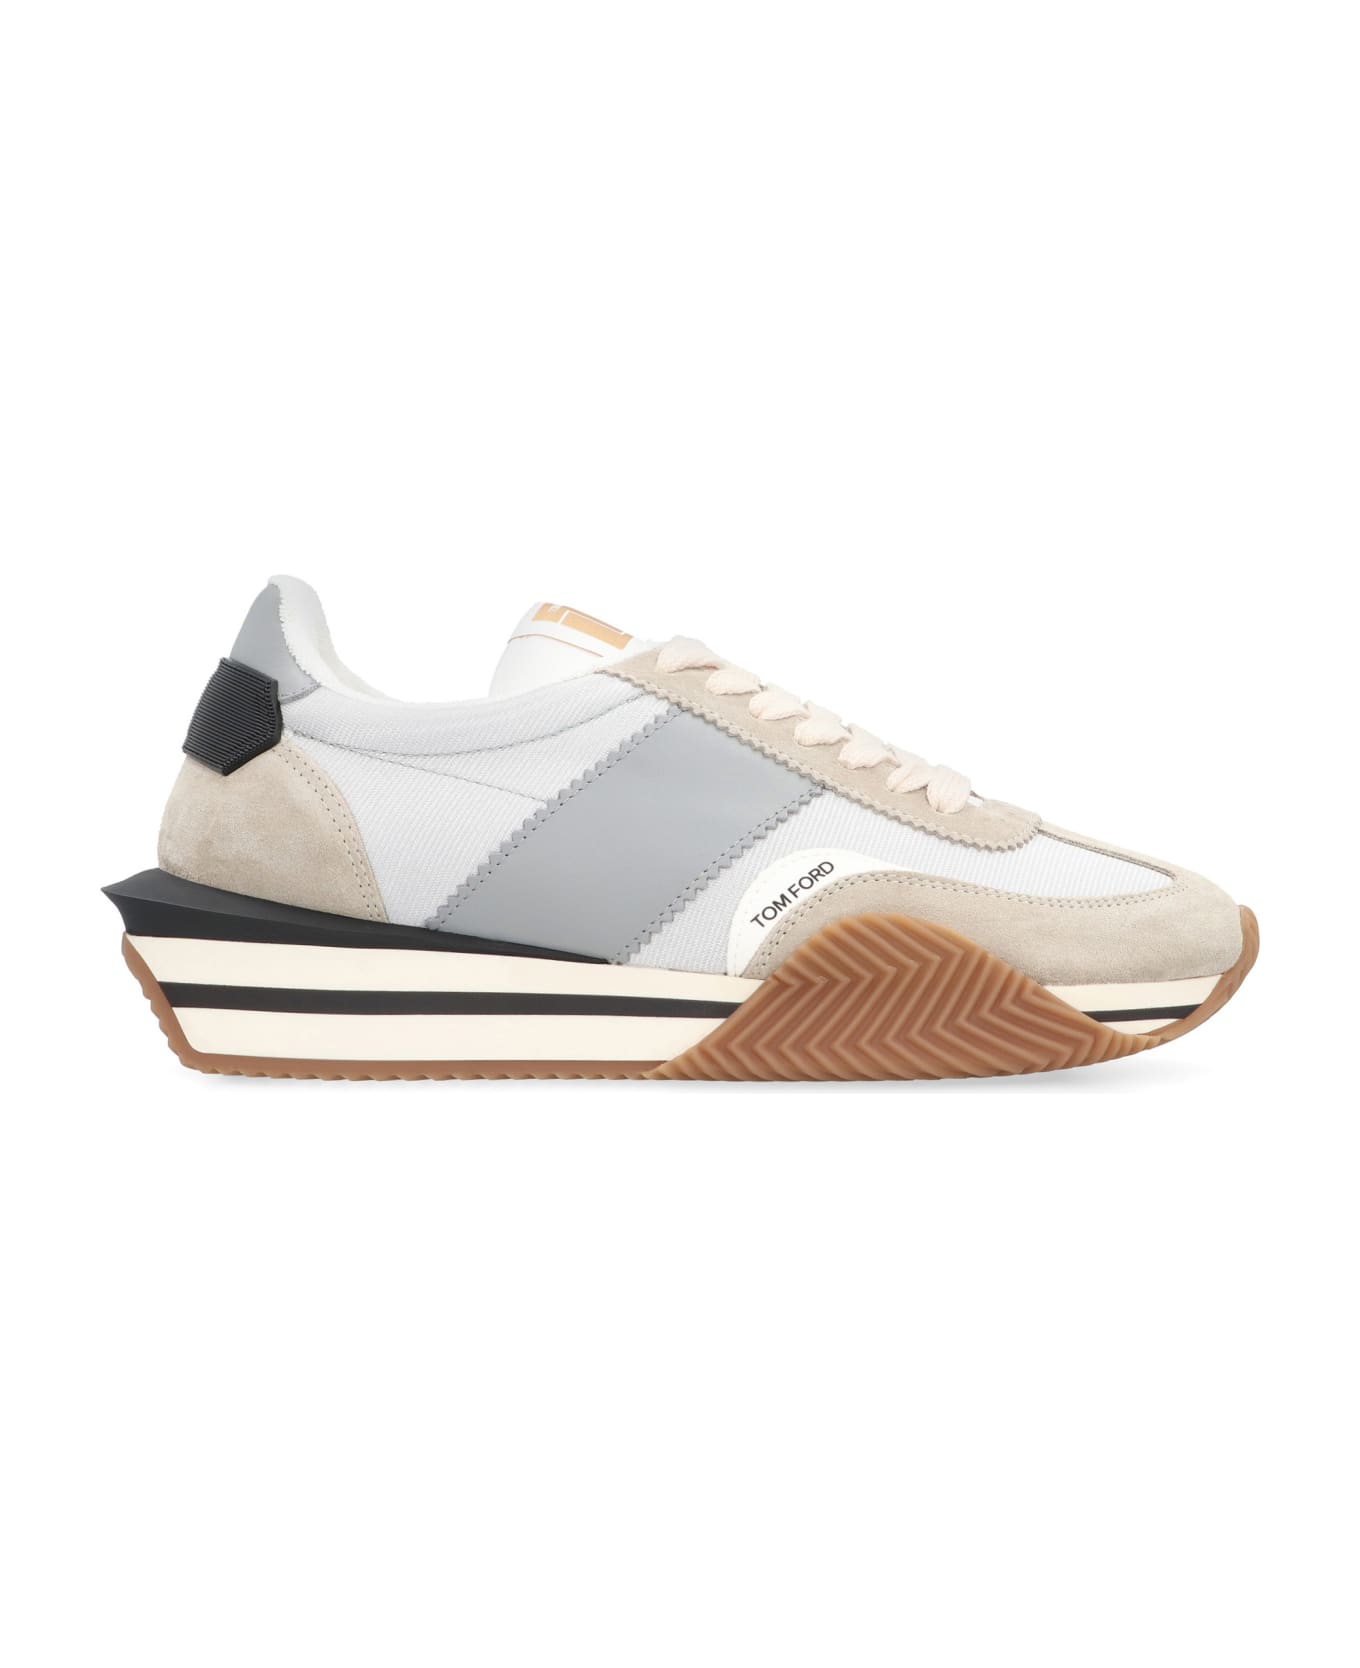 Tom Ford James Low-top Sneakers - Grey スニーカー